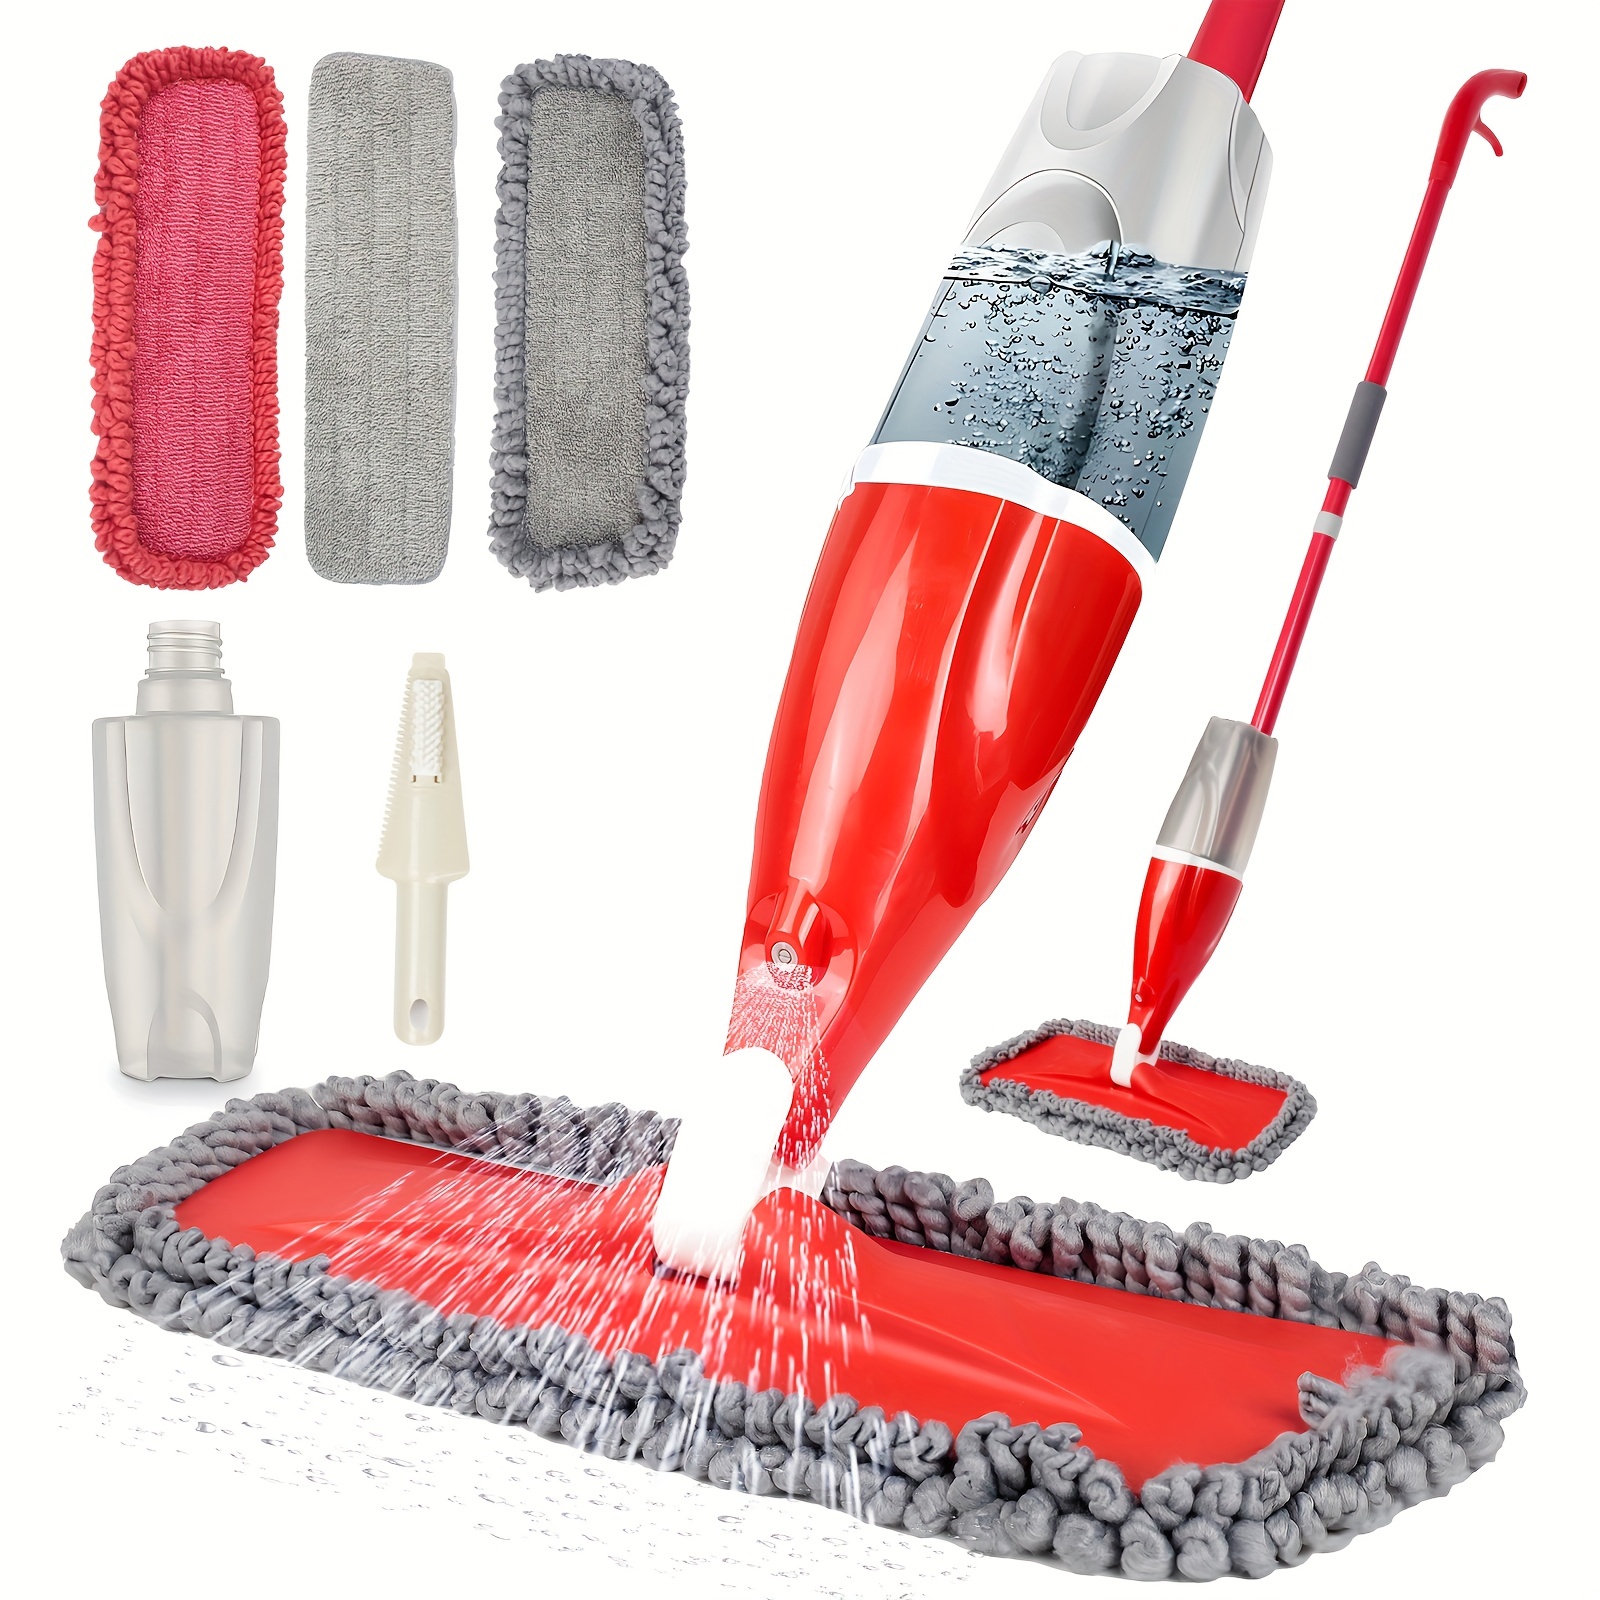 UNA 2 in 1 Floor Scrub Brush With Long Handle, Squeegee Fiber Wet and Dry  Broom Price in India - Buy UNA 2 in 1 Floor Scrub Brush With Long Handle,  Squeegee